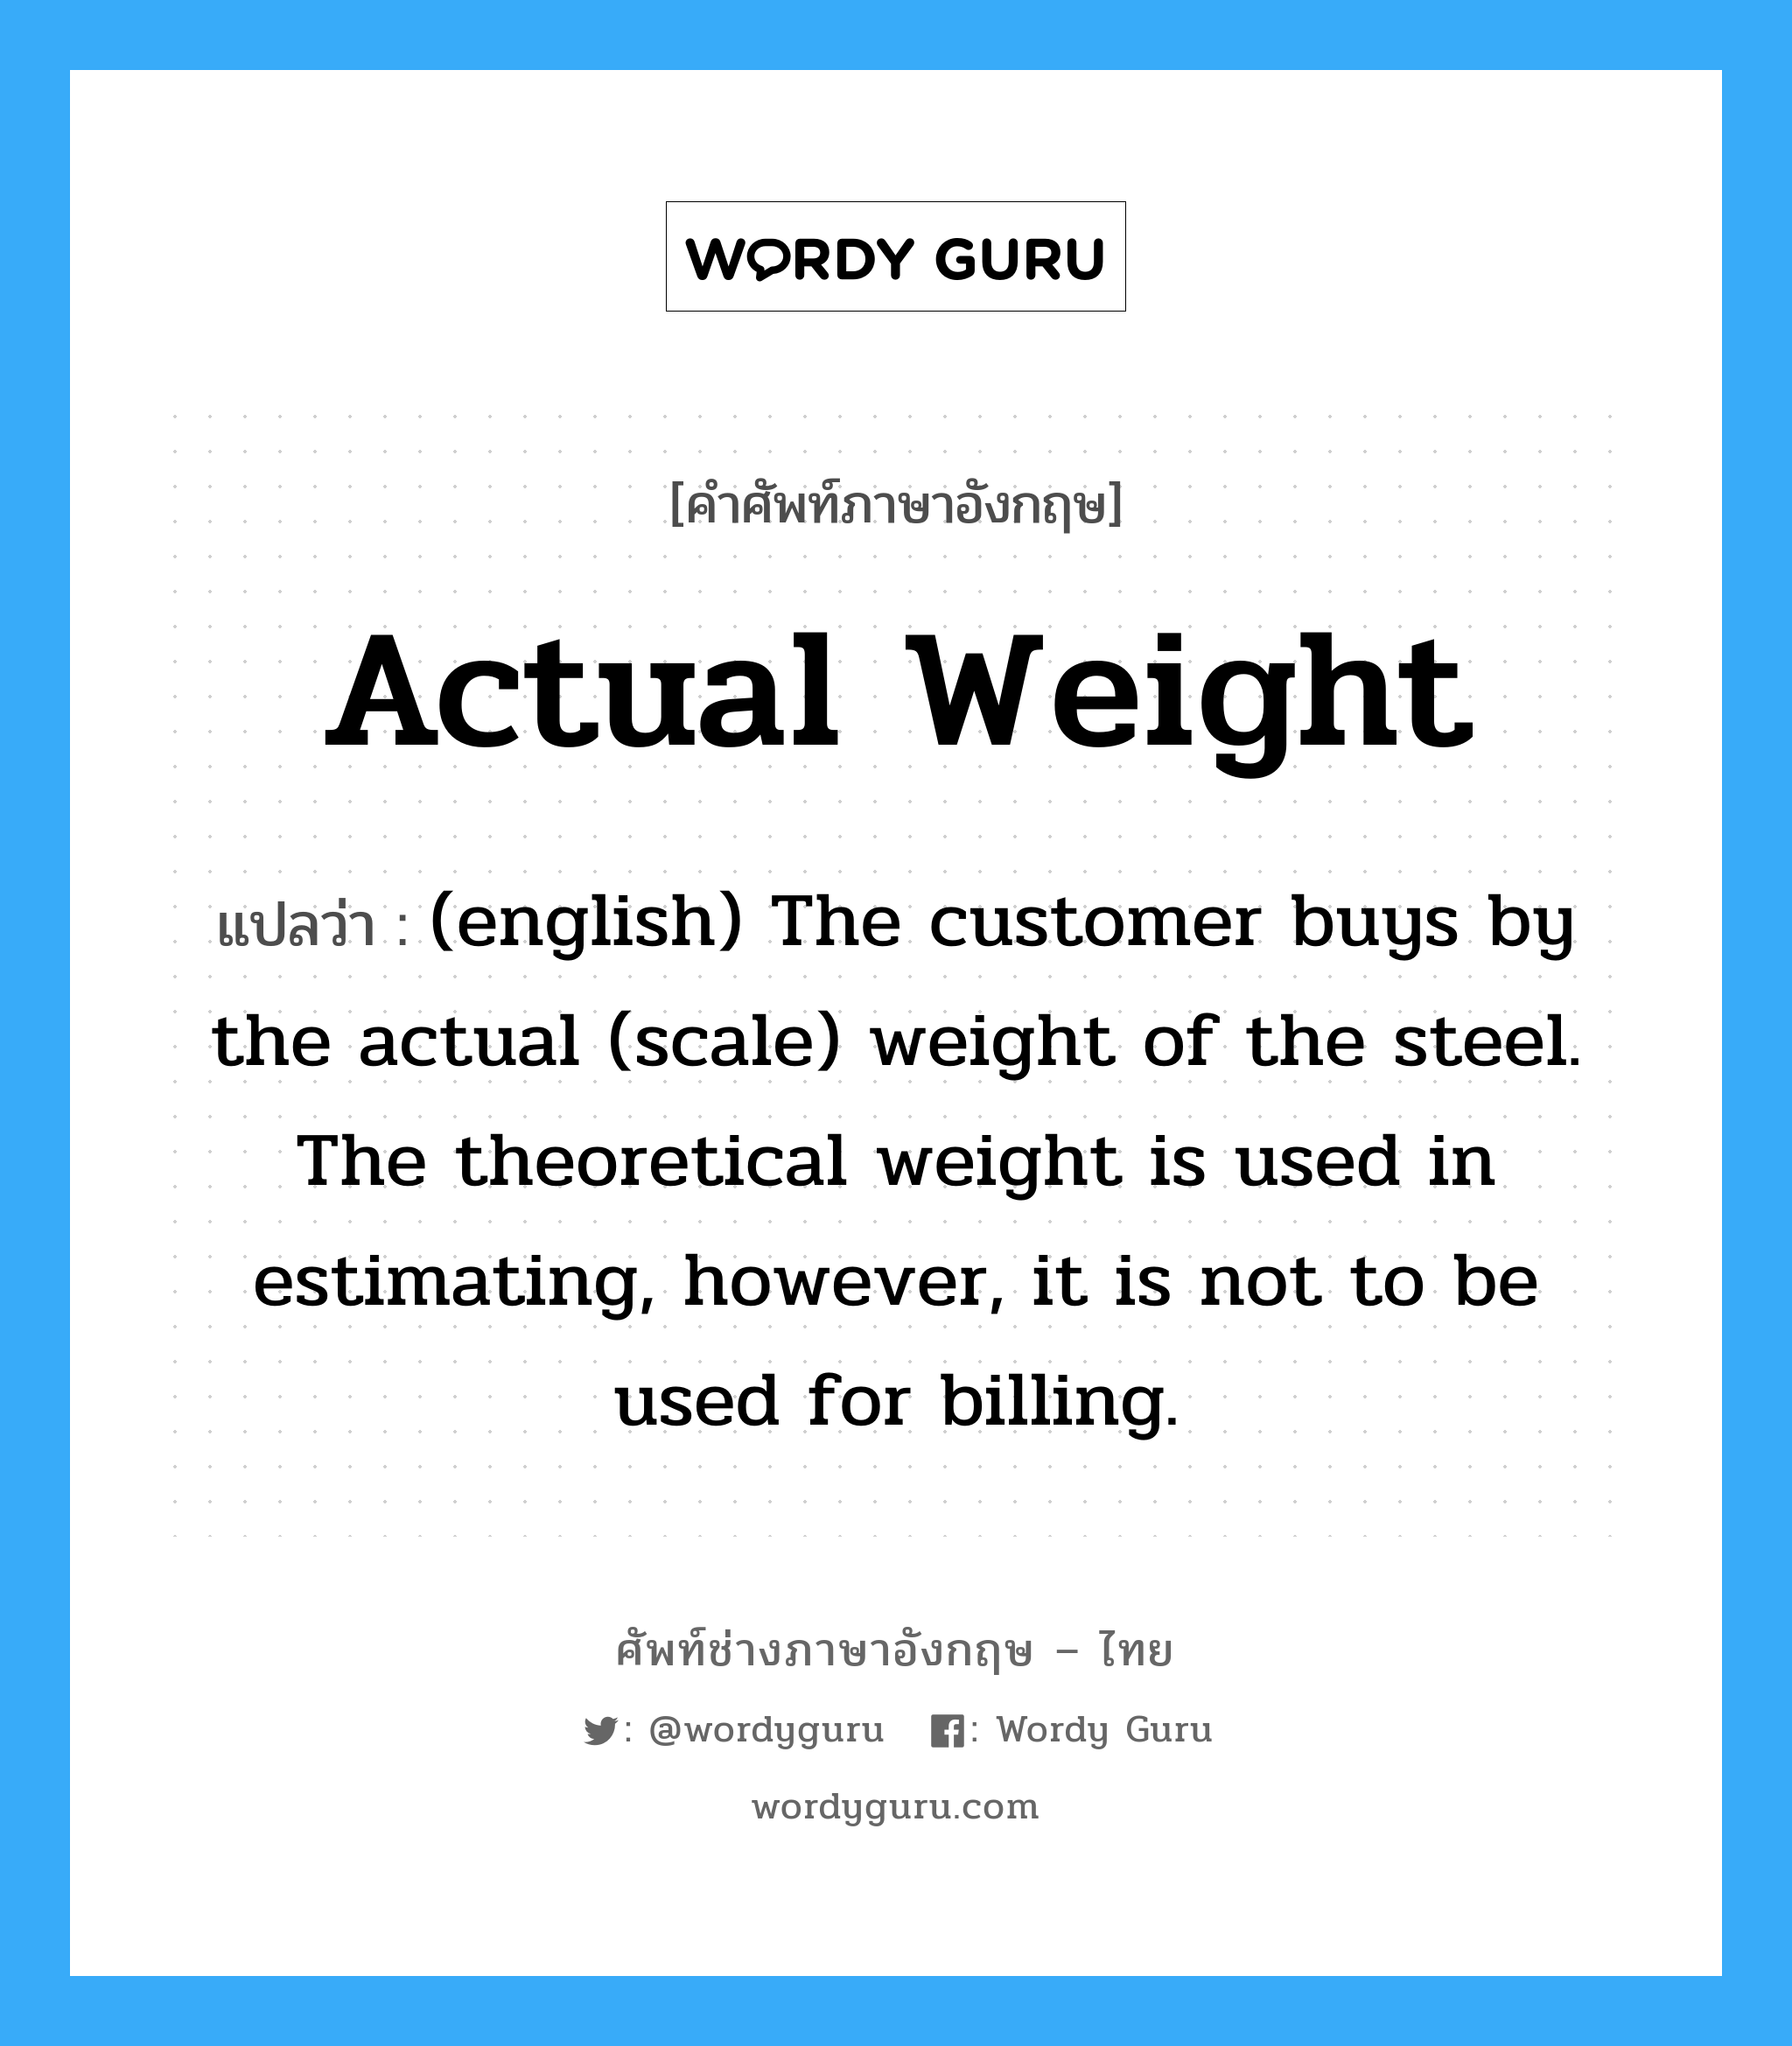 Actual Weight แปลว่า?, คำศัพท์ช่างภาษาอังกฤษ - ไทย Actual Weight คำศัพท์ภาษาอังกฤษ Actual Weight แปลว่า (english) The customer buys by the actual (scale) weight of the steel. The theoretical weight is used in estimating, however, it is not to be used for billing.